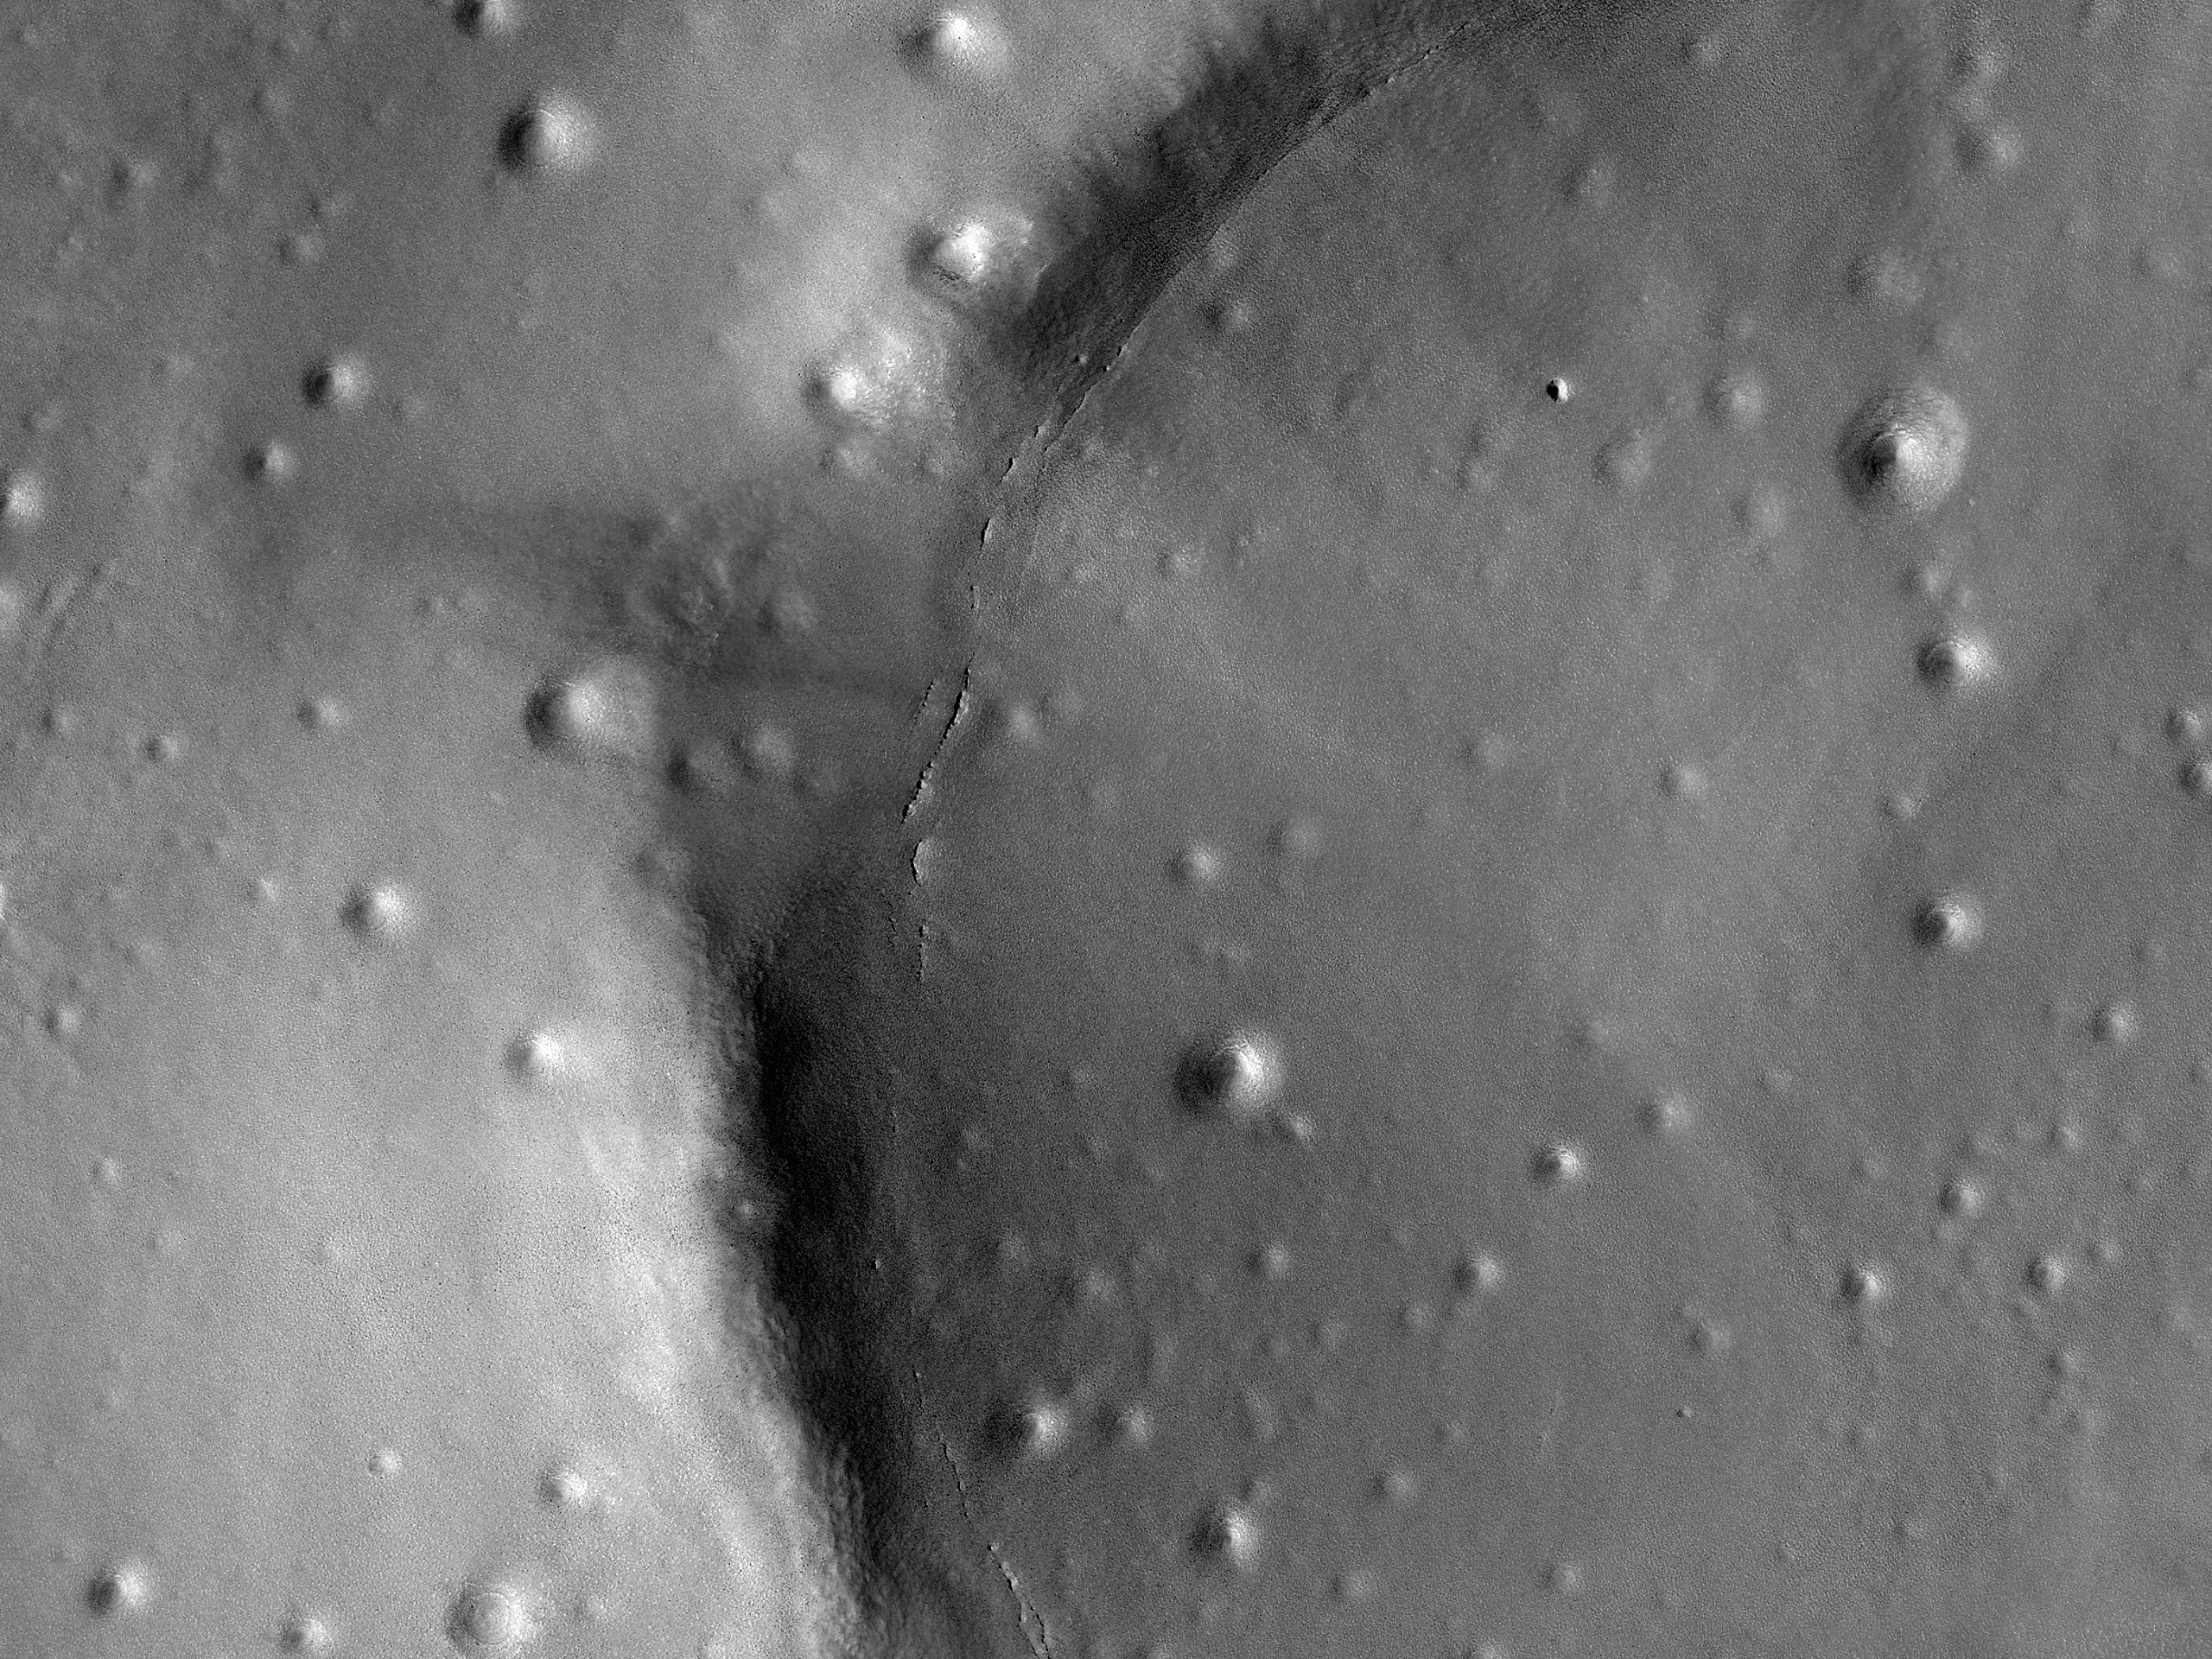 Small Expanded Craters in the Northern Lowlands